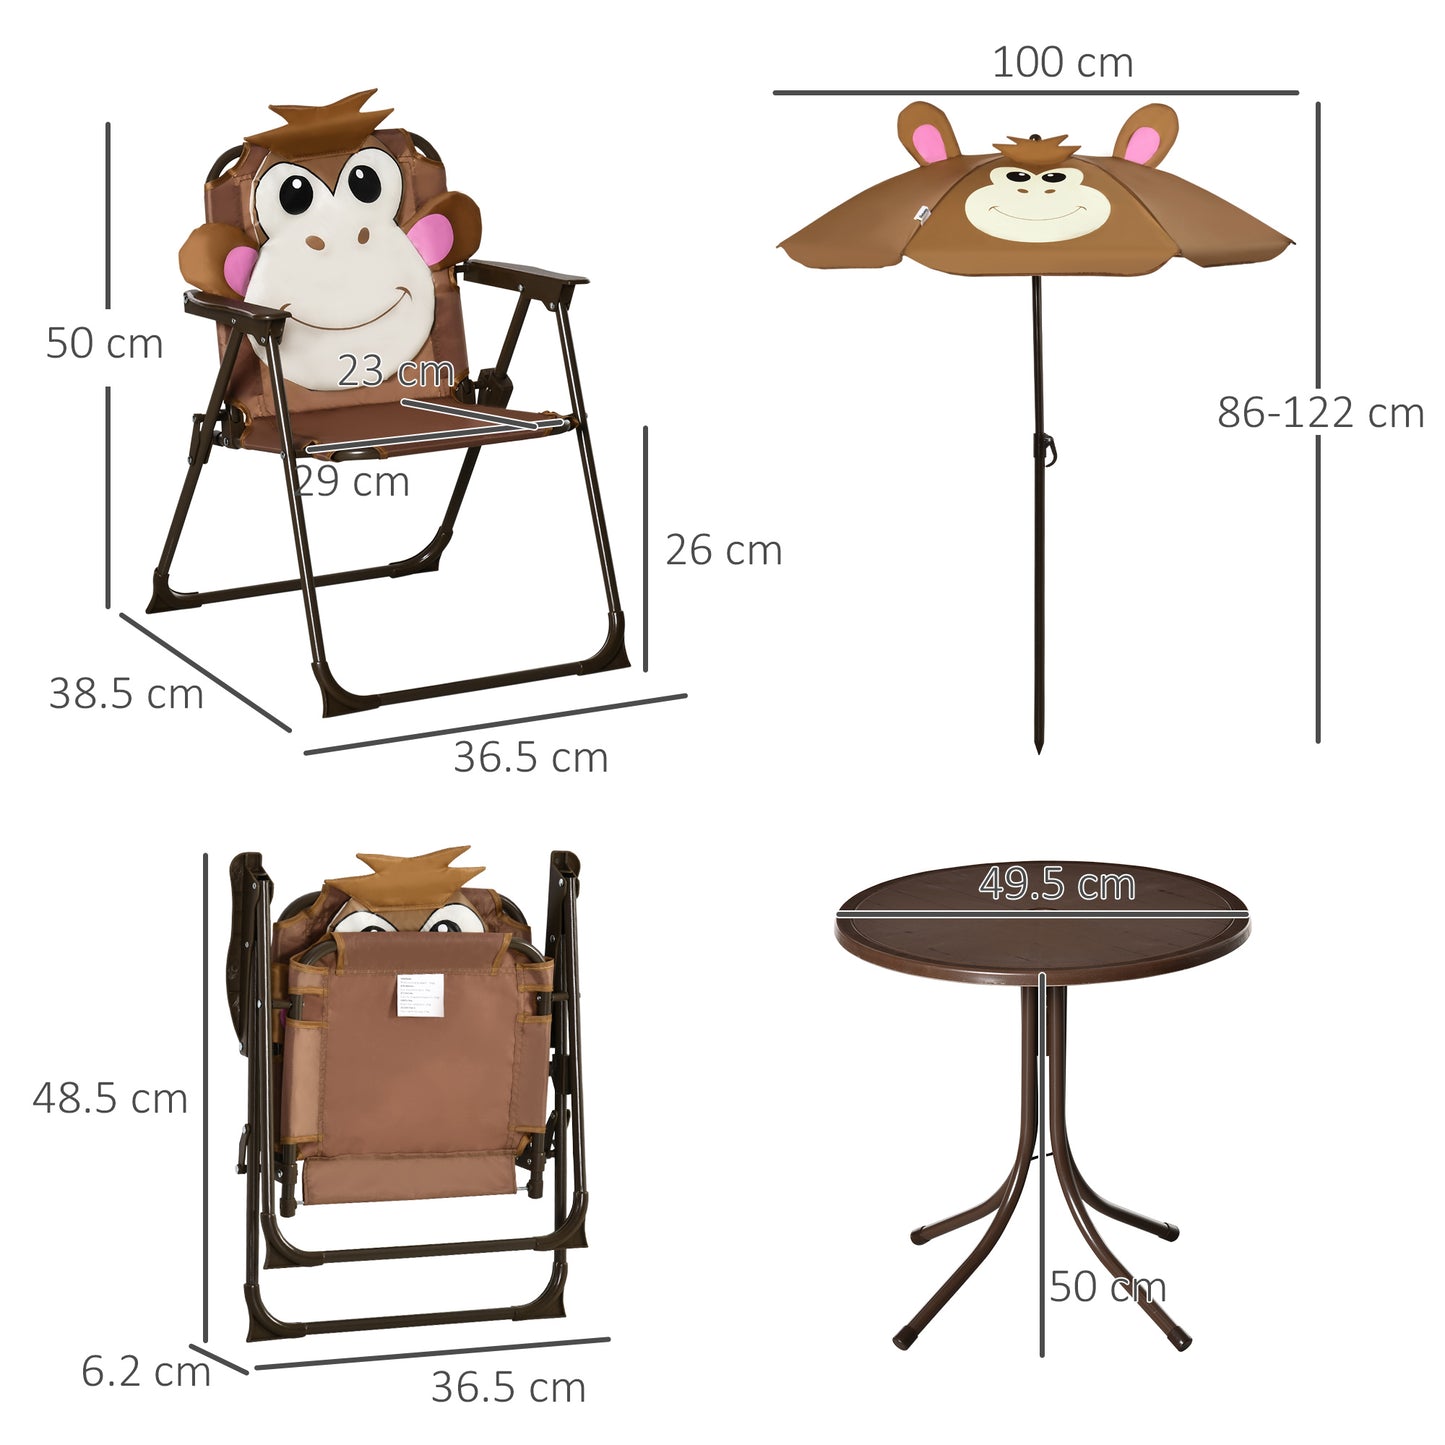 Outsunny Kids Picnic & Table Chair set, Outdoor Folding Garden Furniture w/ Monkey Design, Removable, Adjustable Sun Umbrella, Ages 3-6 Years - Brown